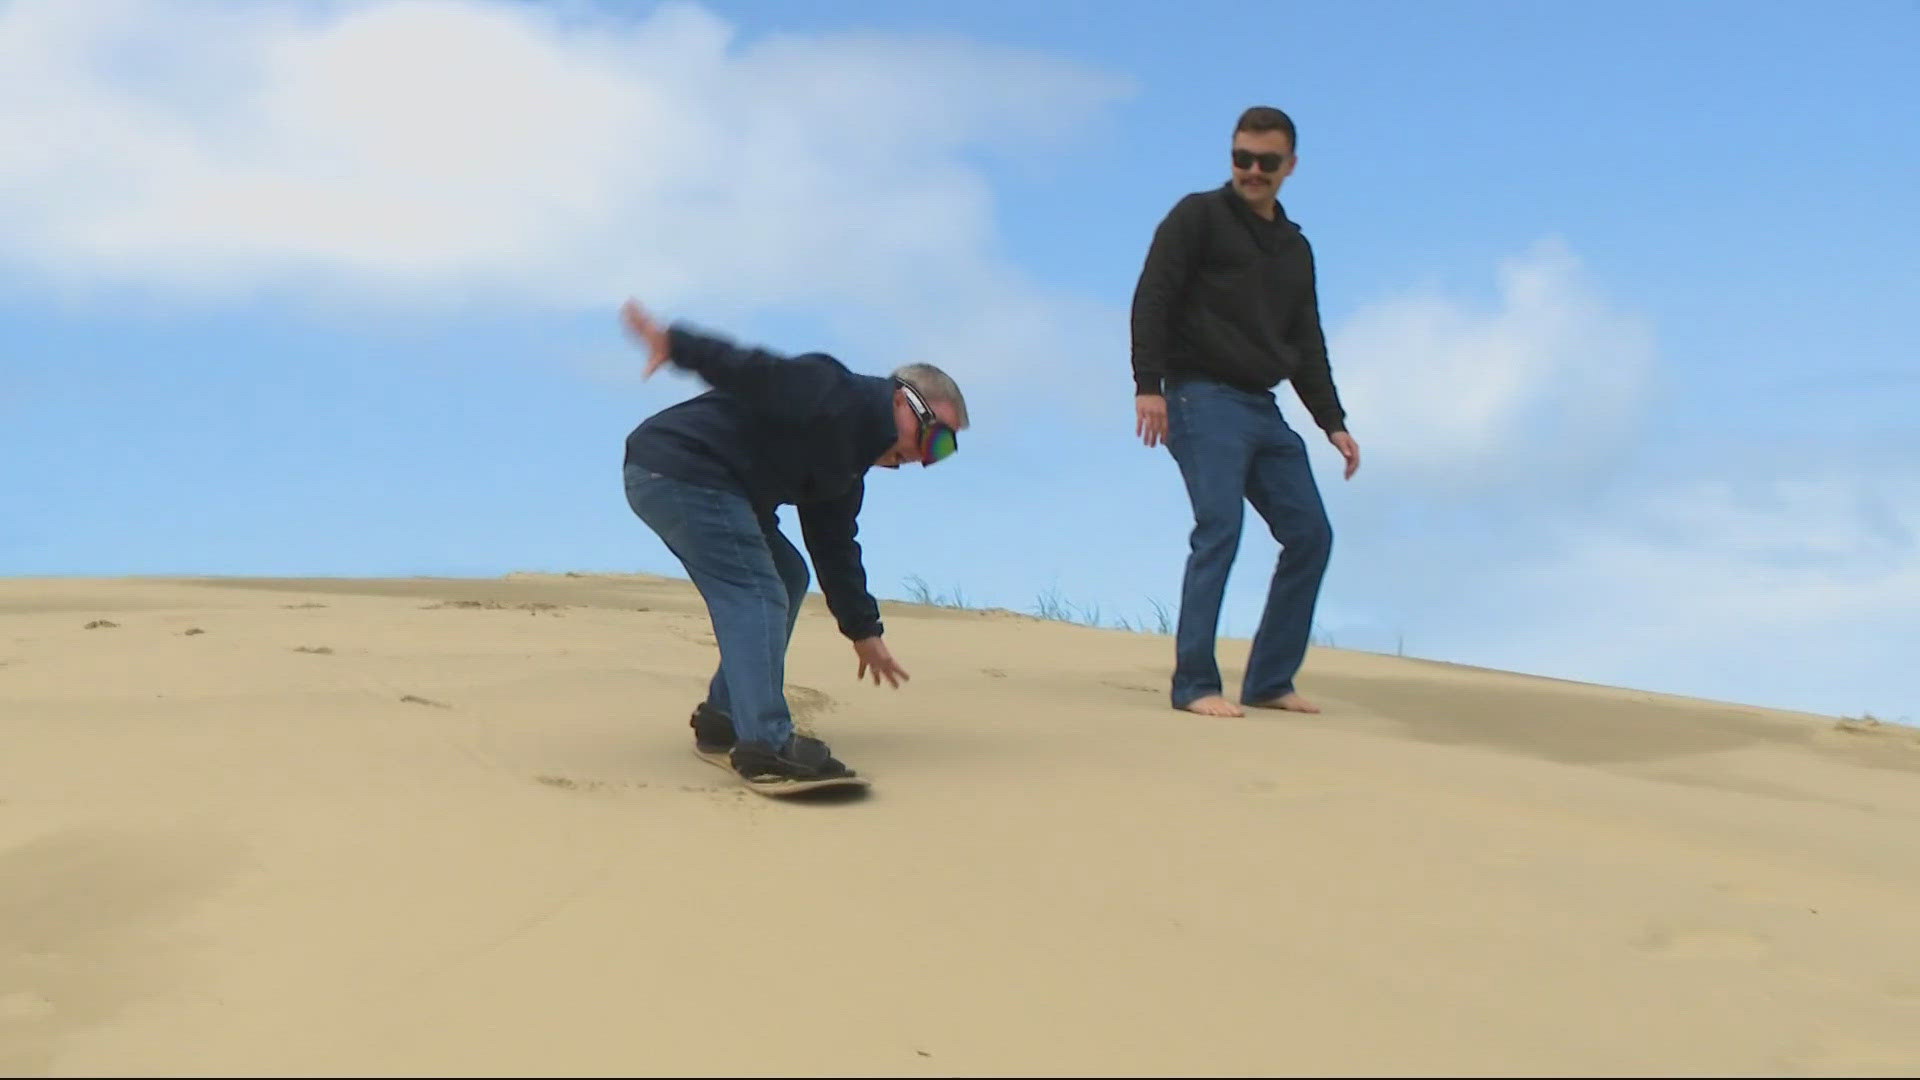 From checking out Sea Lion Caves to sand boarding on the dunes, KGW meteorologist Rod Hill learned firsthand why Florence is known as Oregon's coastal playground.